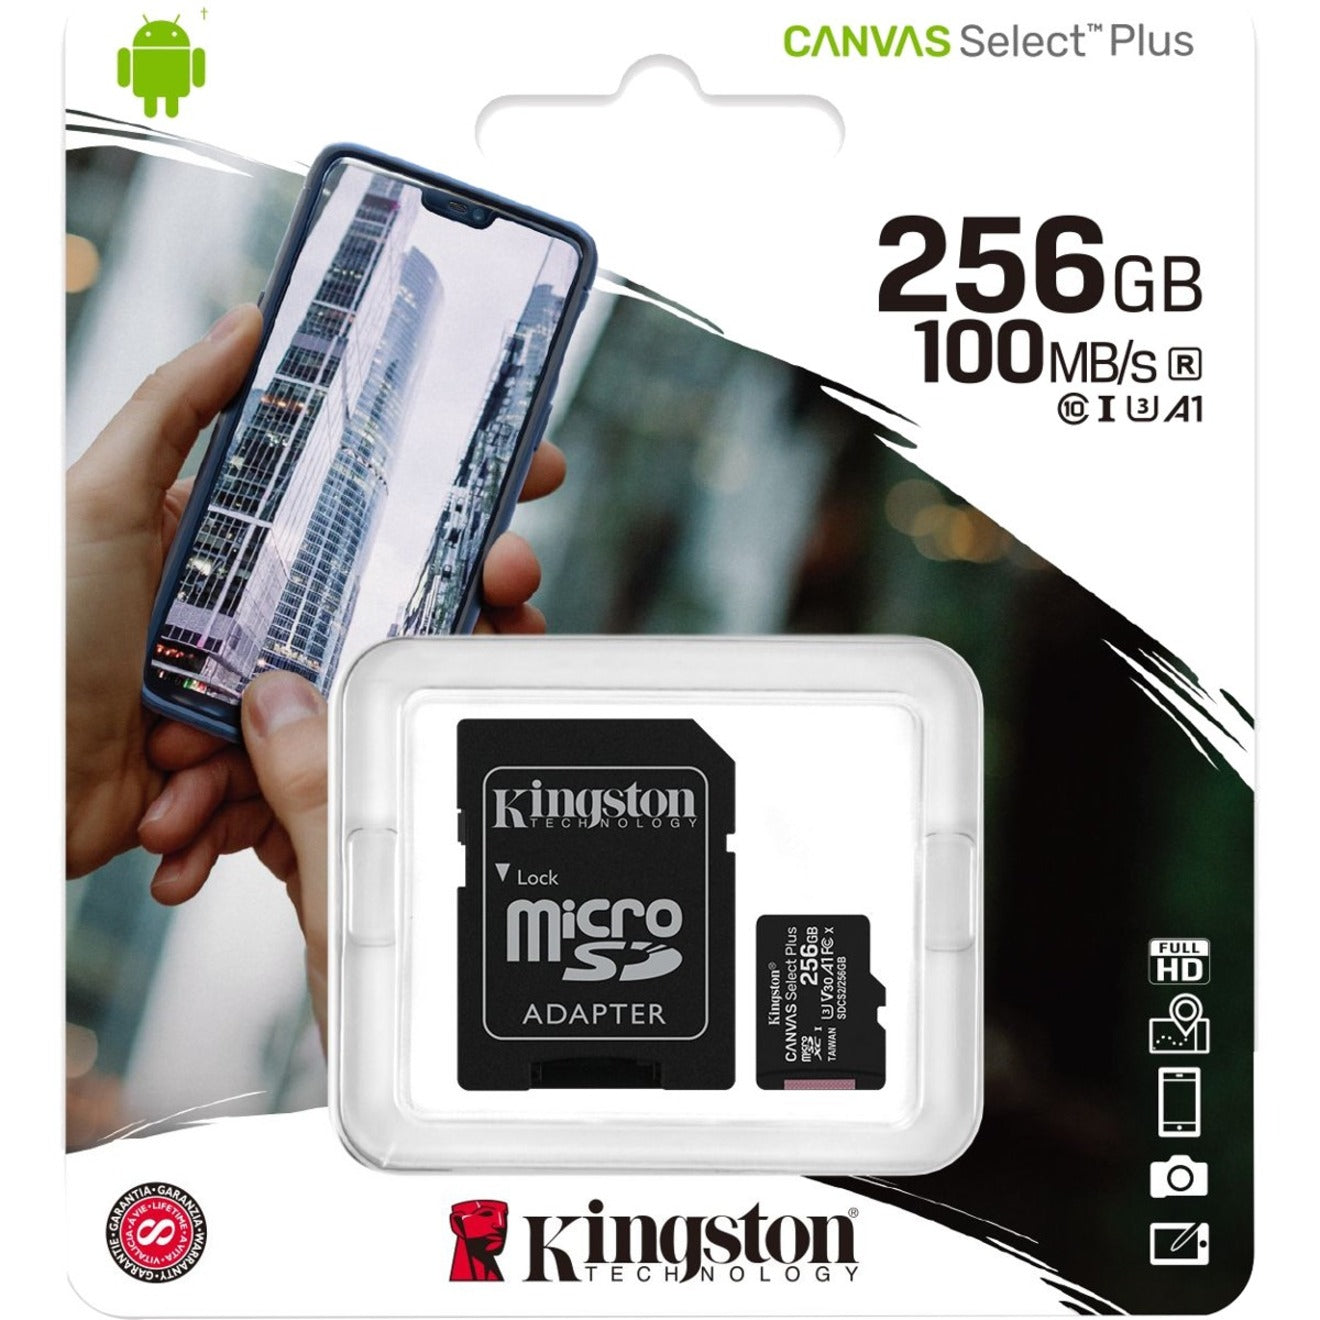 Kingston SDCS2/256GB Canvas Select Plus microSD Card With Android A1 Performance Class, 256GB Storage Capacity, Class 10/UHS-I (U3) Speed Class Rating